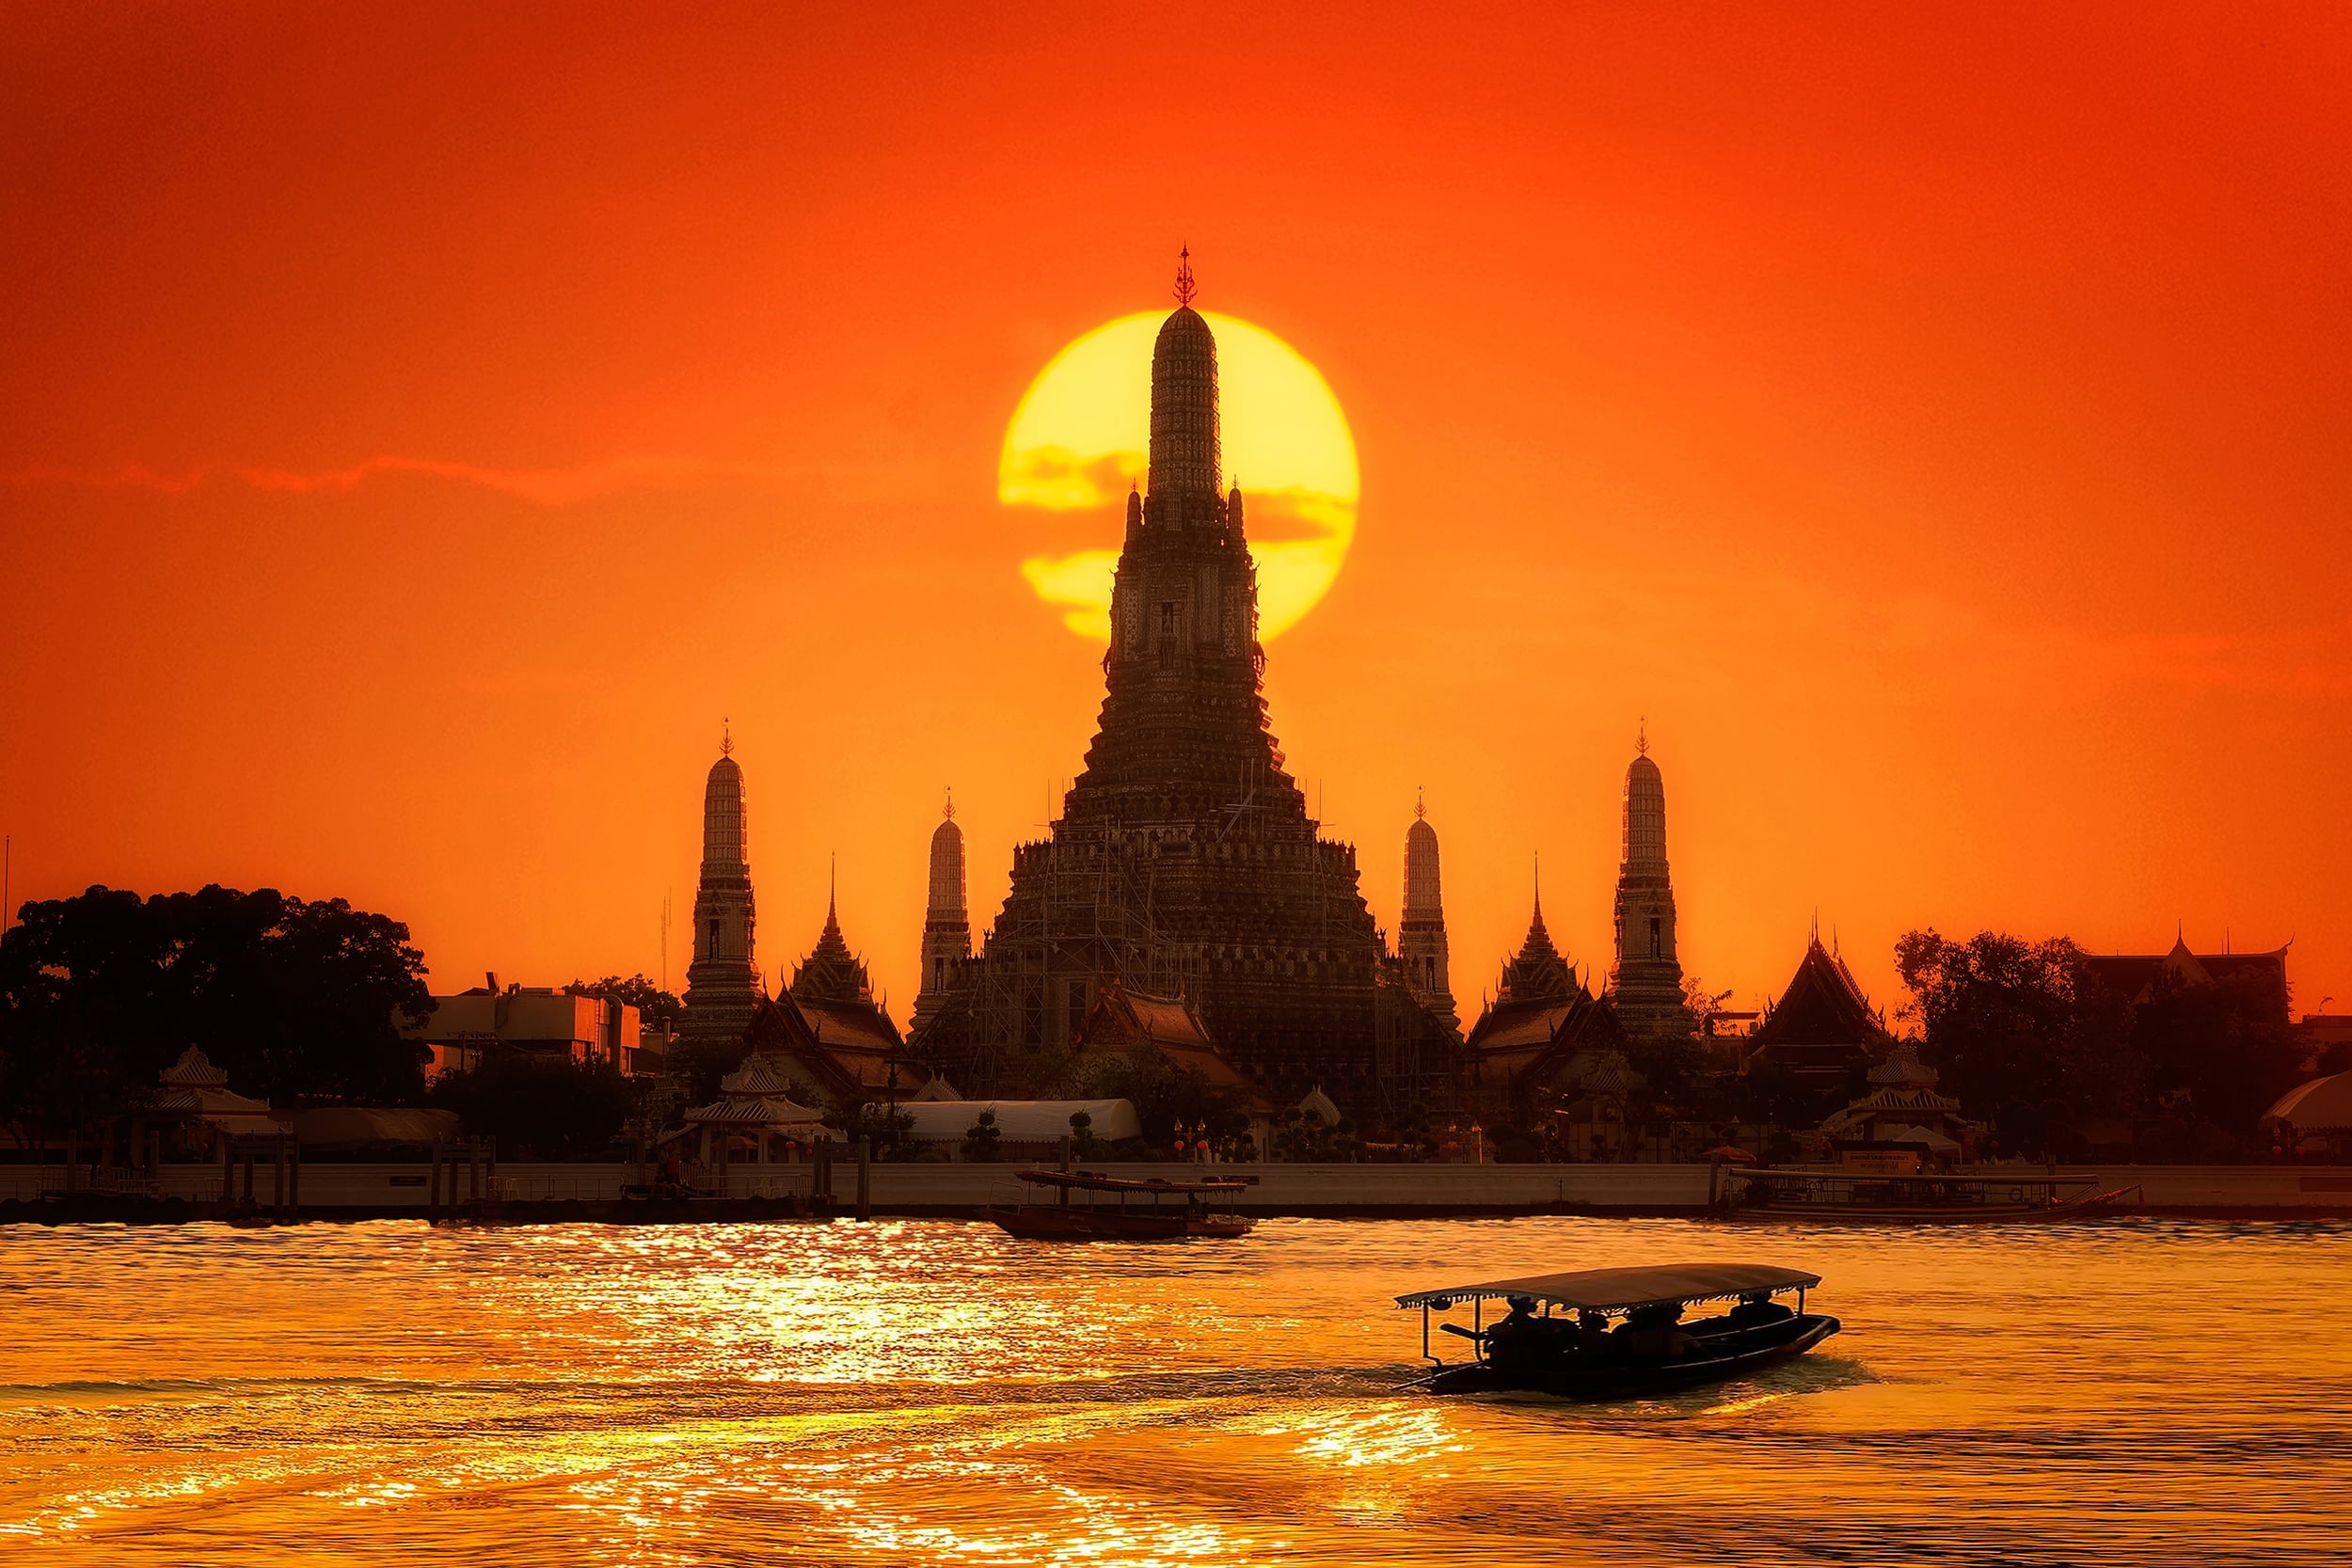 A temple on the water at sunset